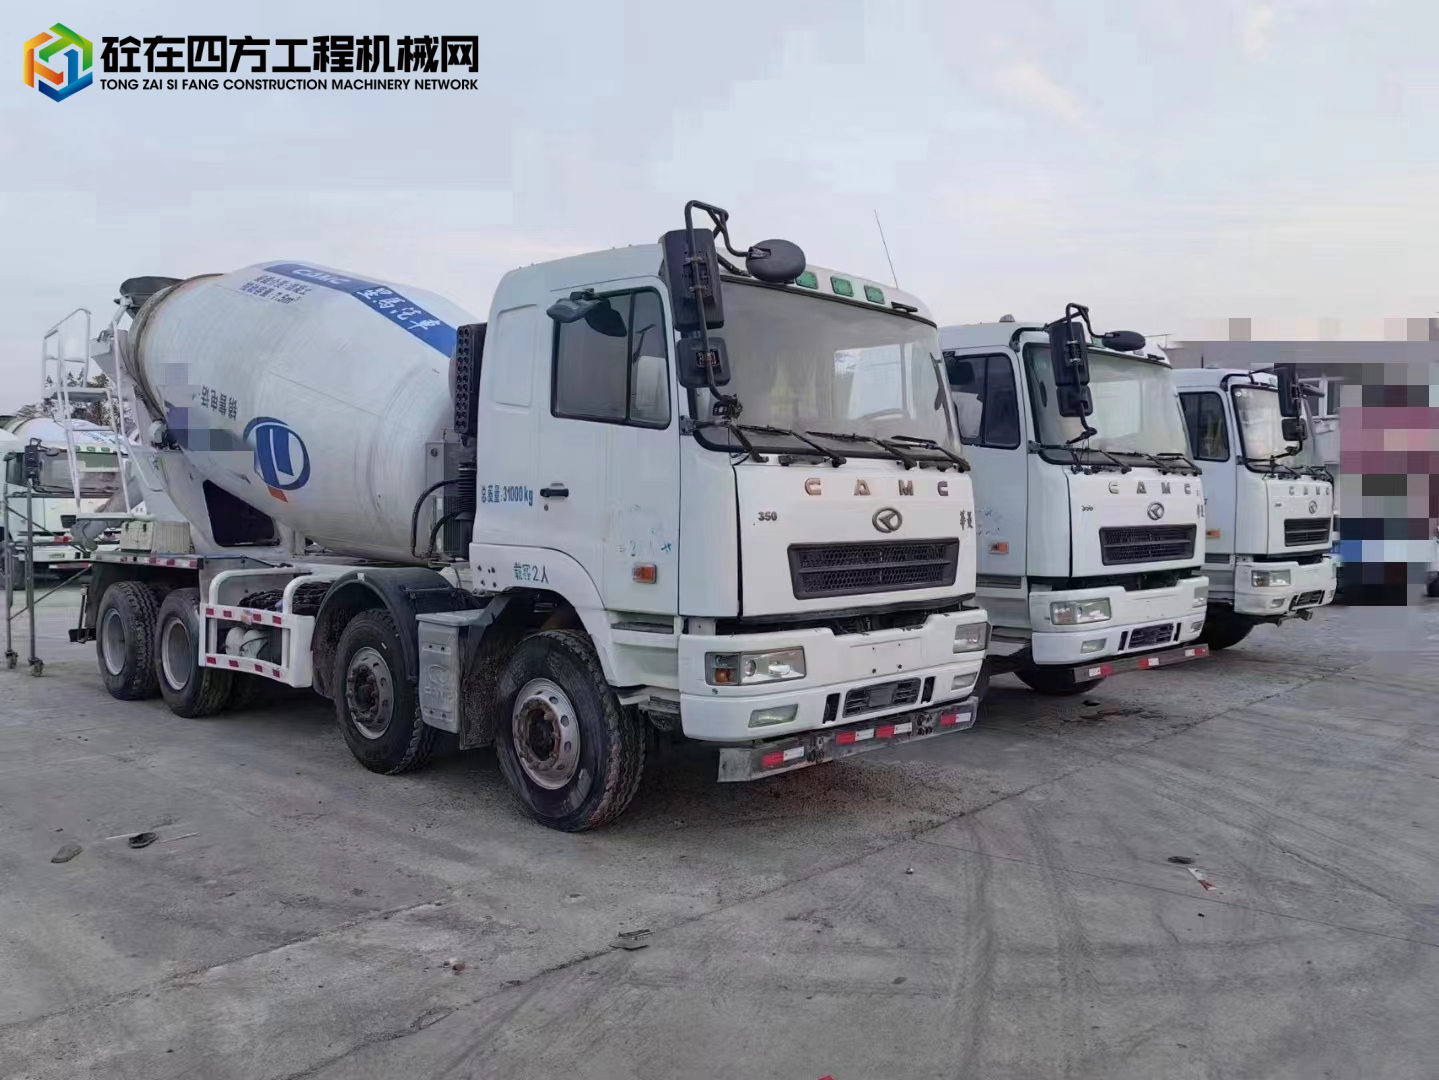 https://images.tongzsf.com/tong/truck_machine/20240228/165ded827dd285.jpg